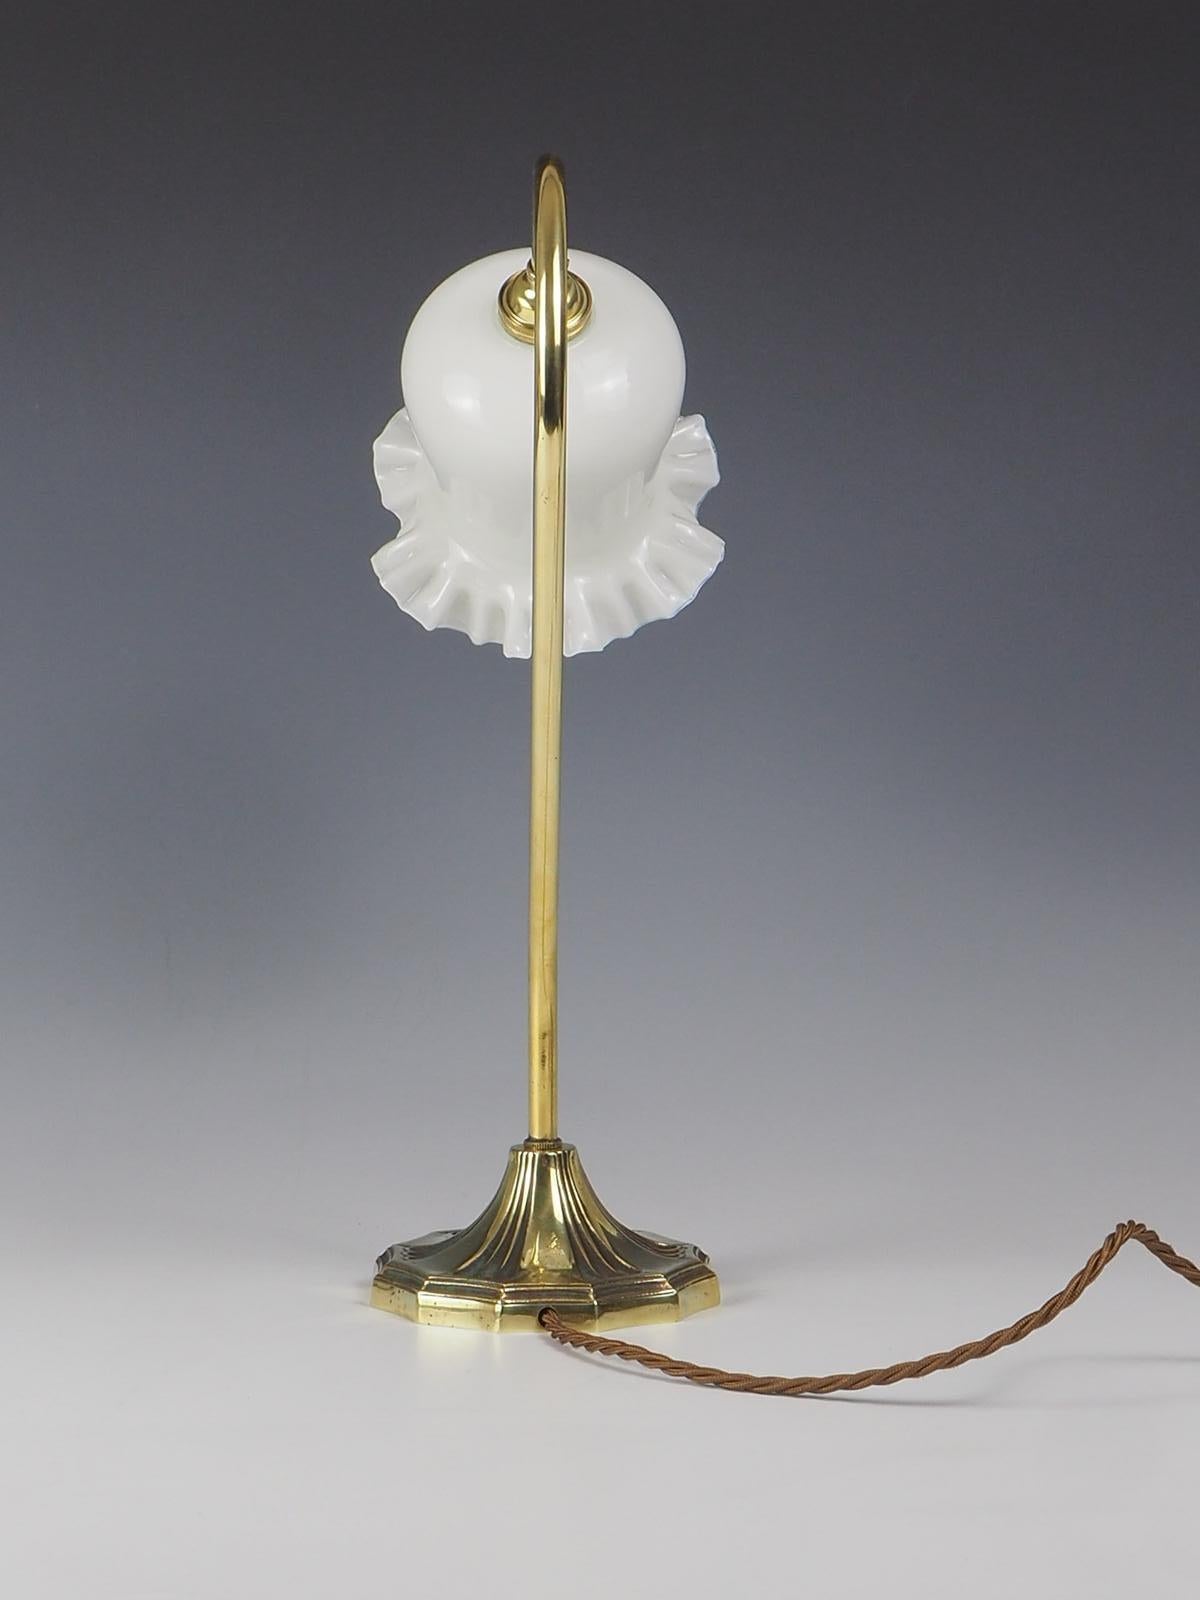 Elegant Art Nouveau Swan Neck Table Lamp with Shade In Good Condition For Sale In Lincoln, GB